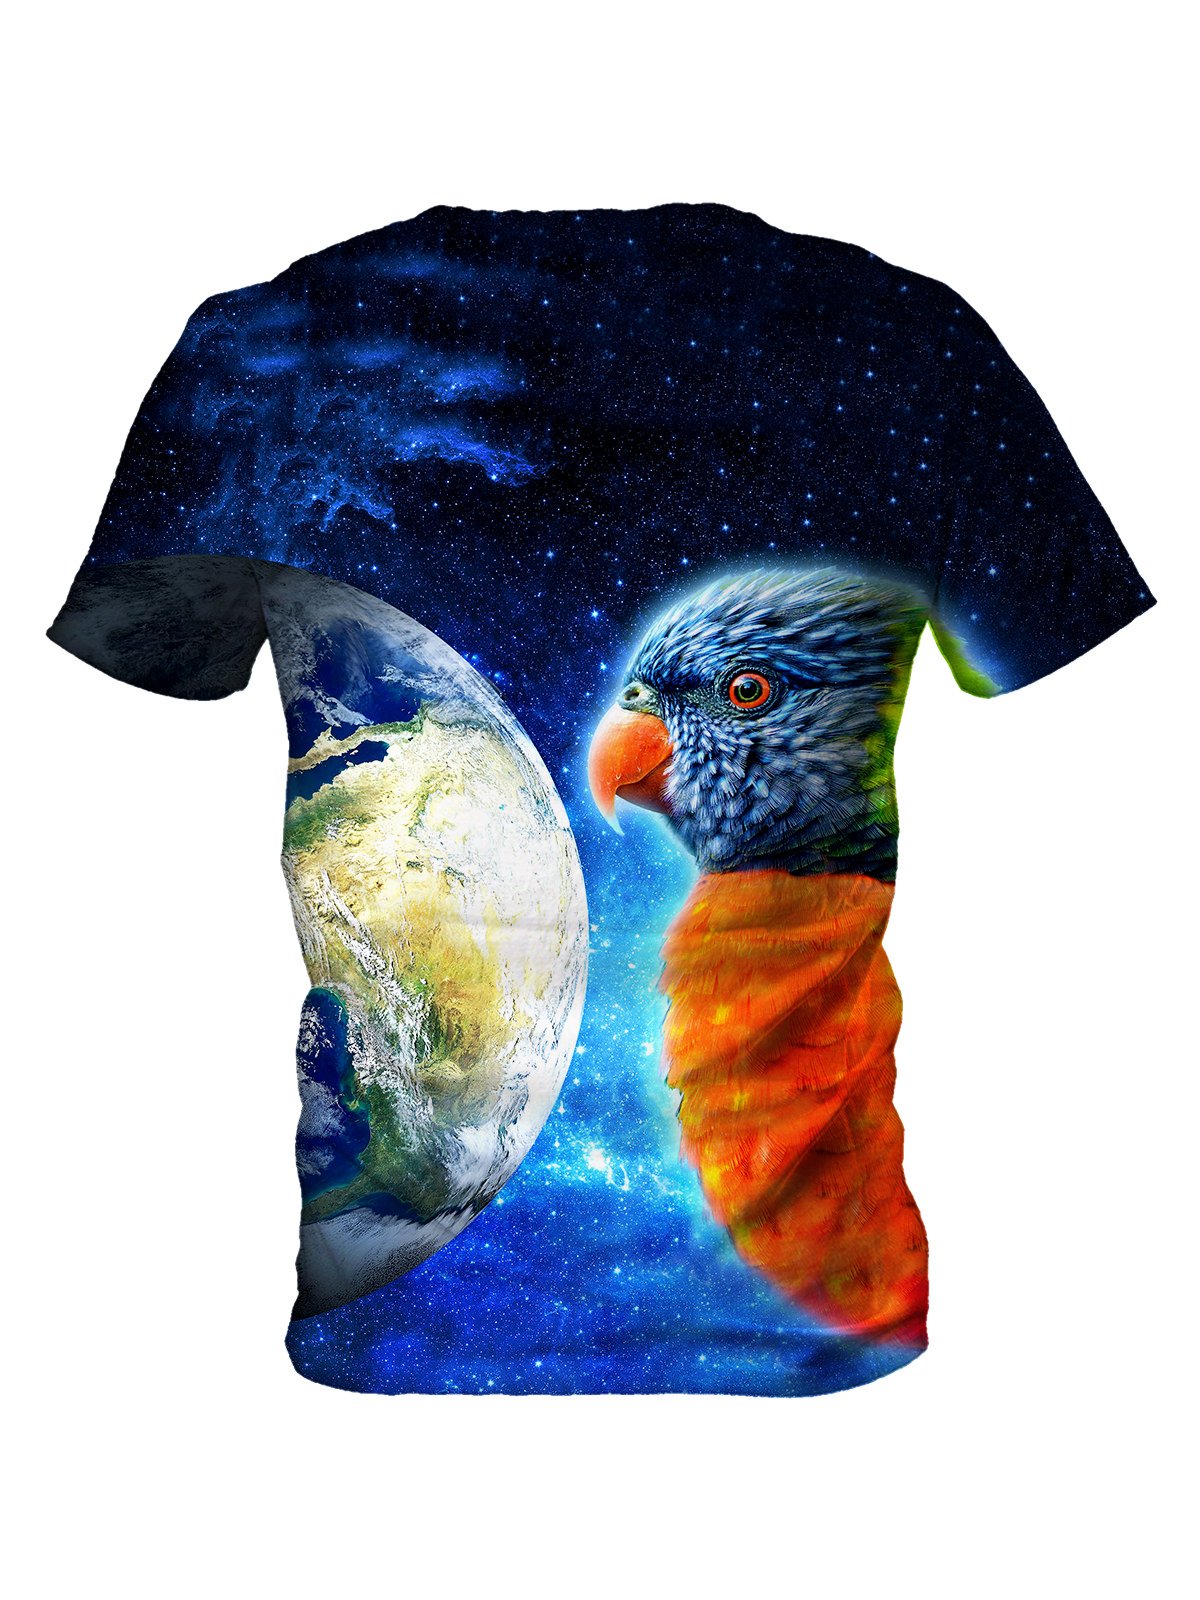 Back view of all over print psychedelic galaxy bird t shirt by Gratefully Dyed Apparel. 